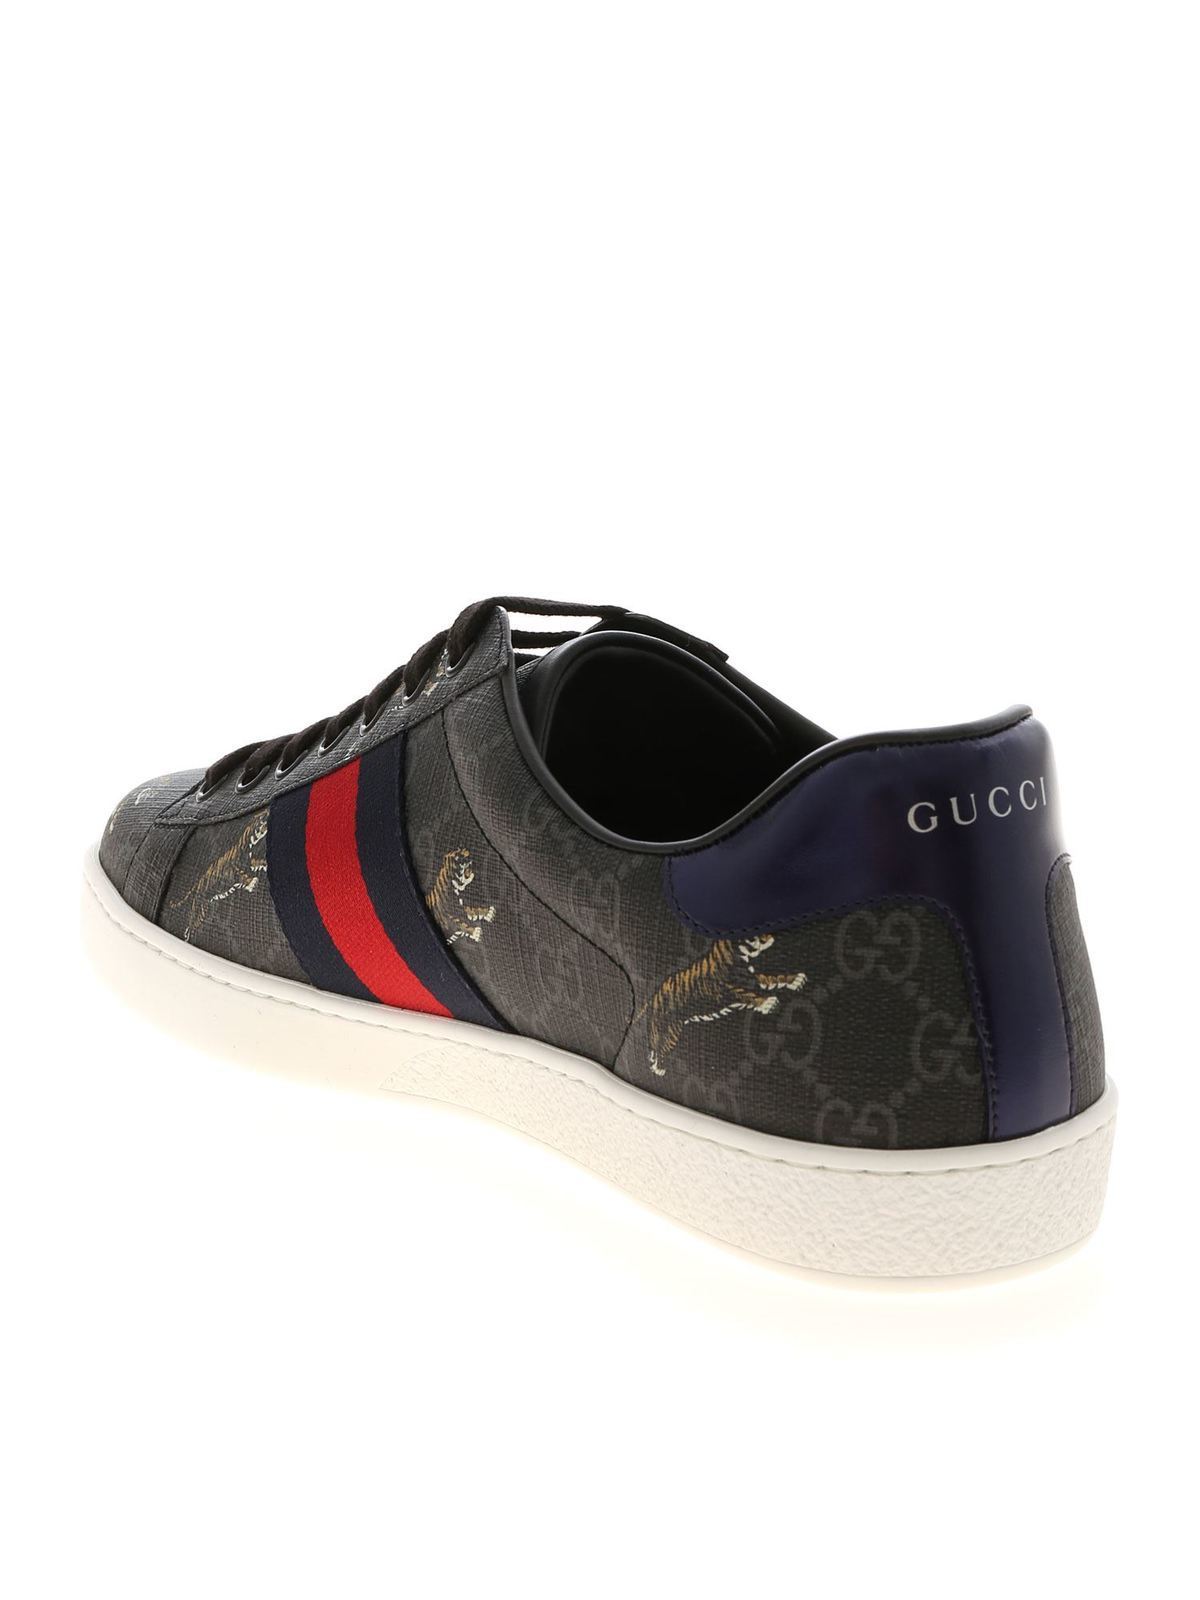 gucci ace tiger sneakers